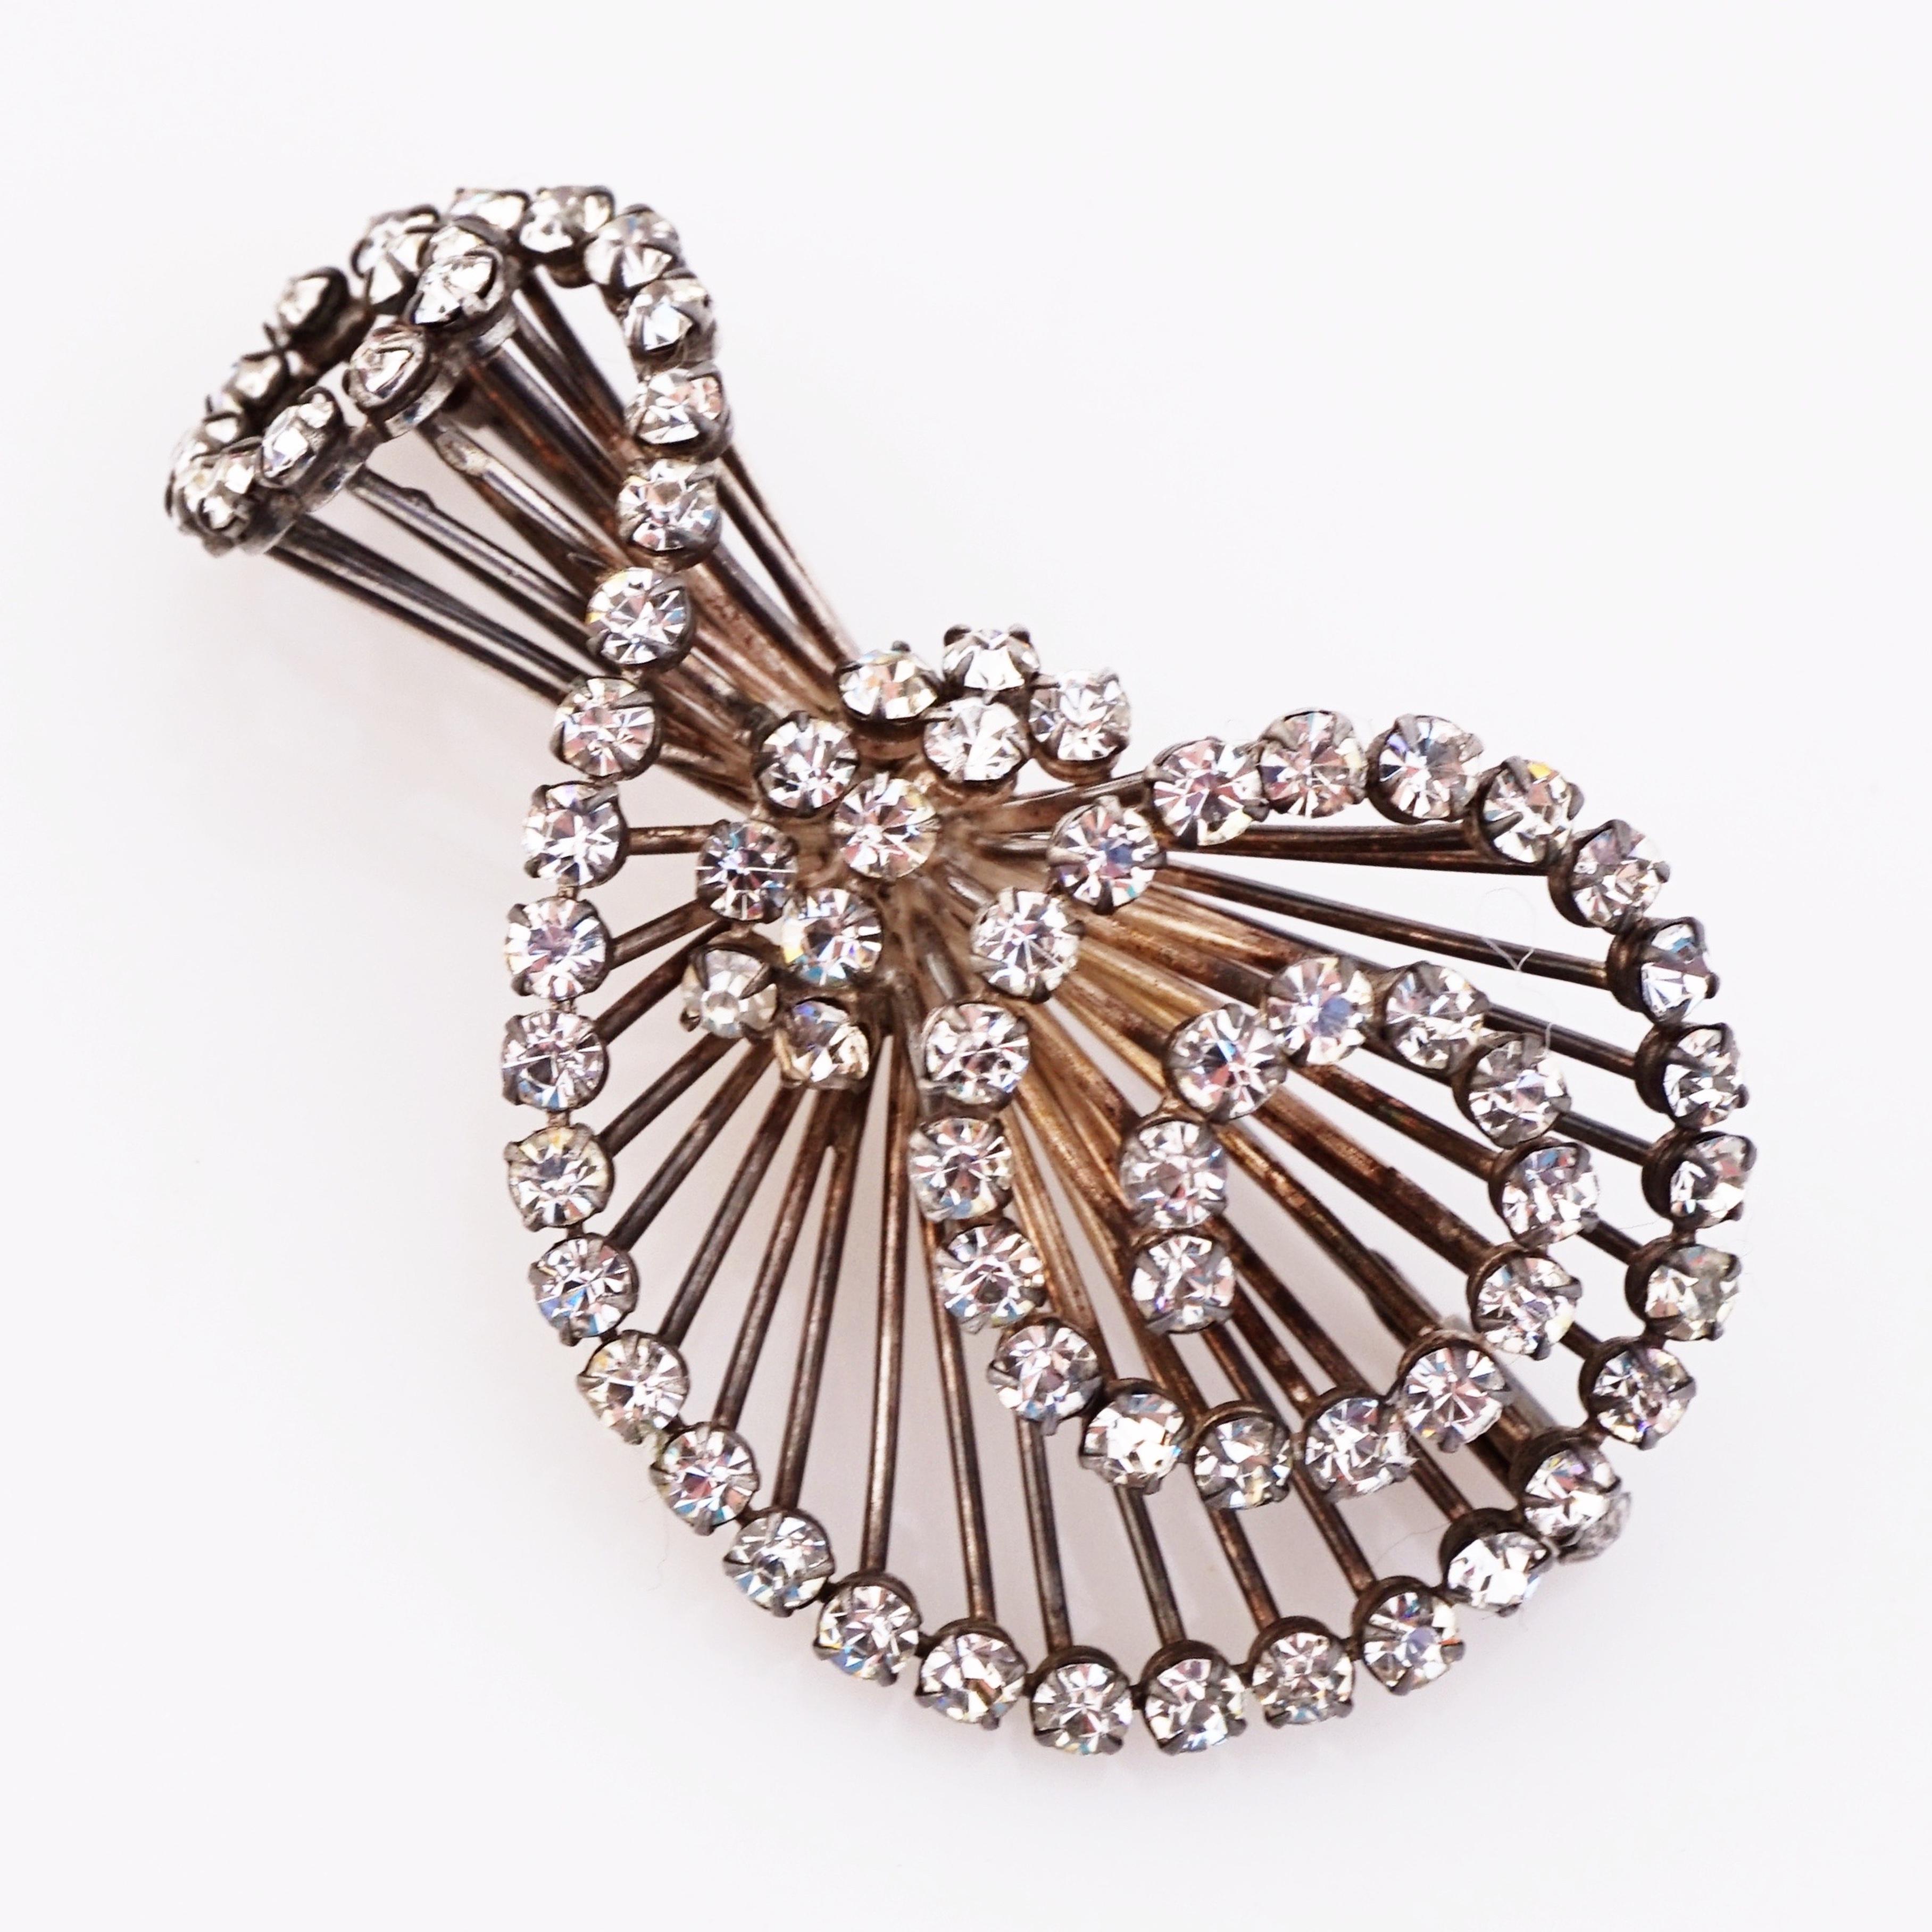 Women's Sterling Silver Swirled Wire Bunch Brooch With Crystals, 1940s